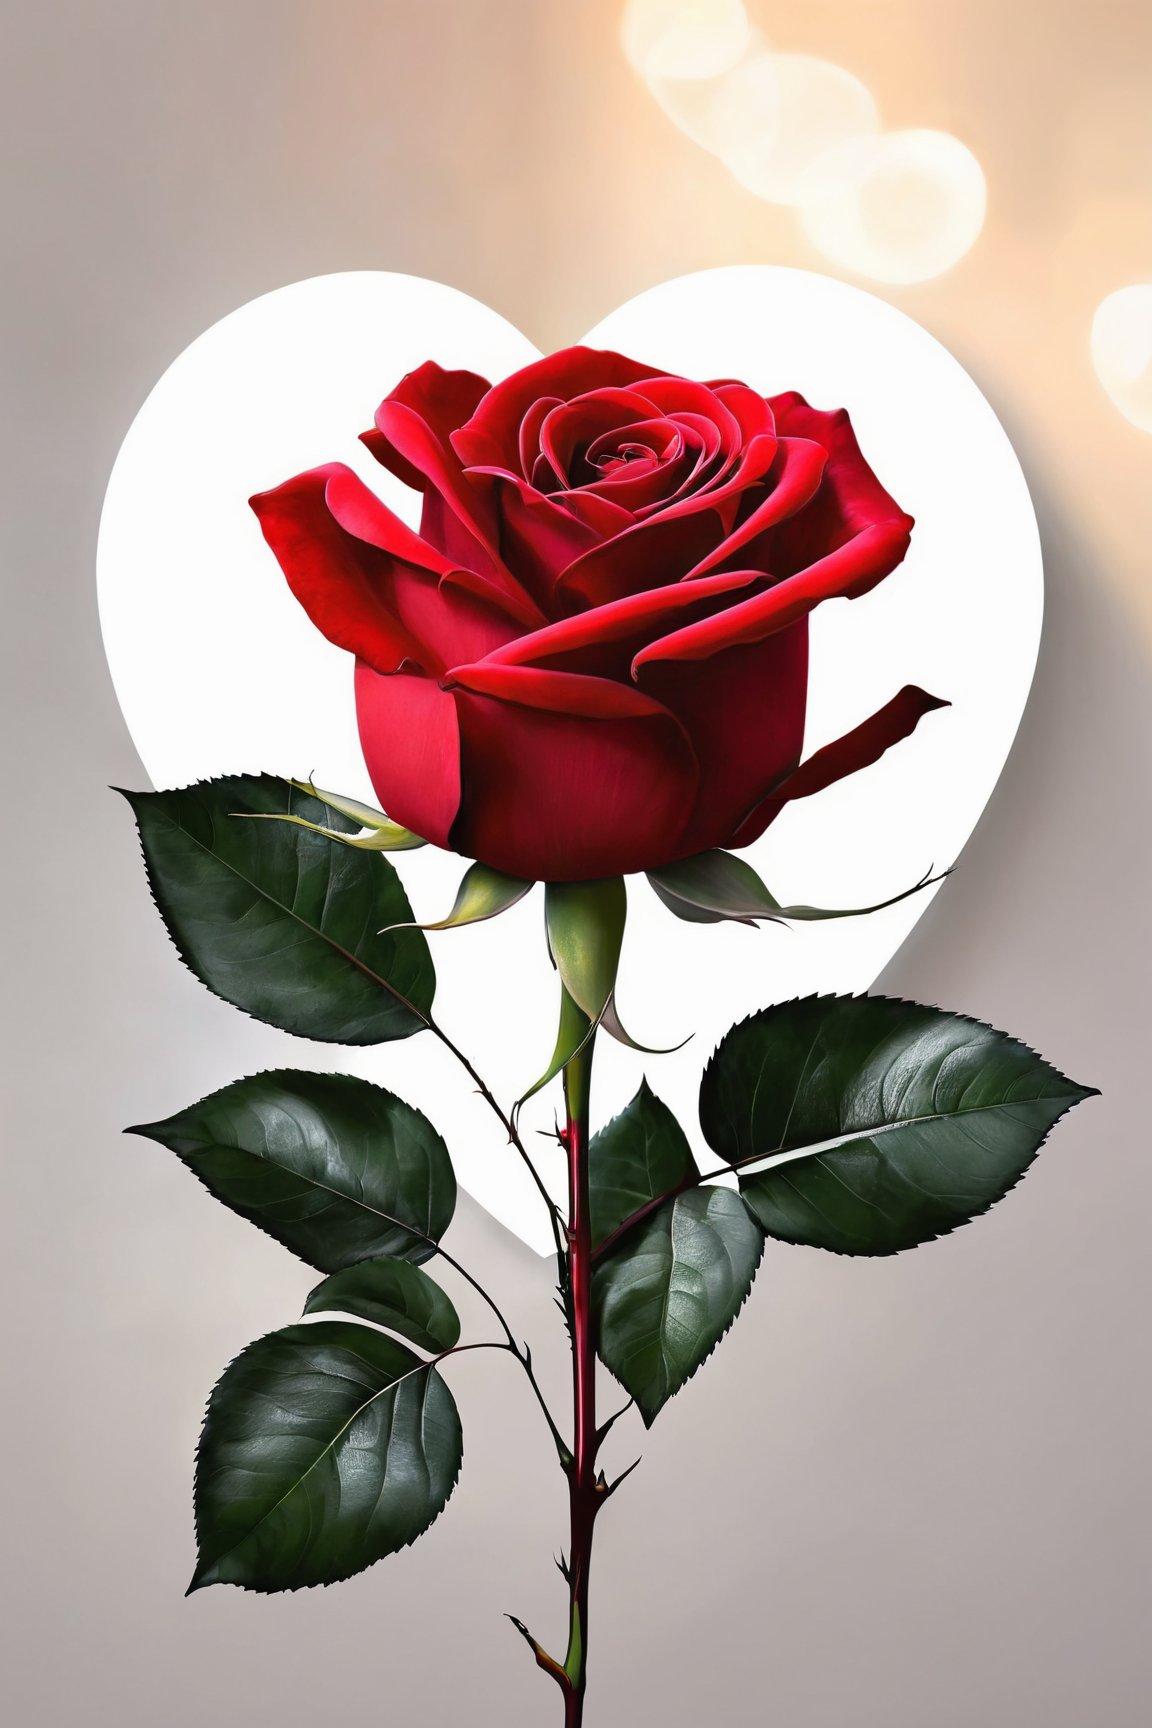 (best quality,8K,highres,masterpiece), ultra-detailed, capturing the essence of Valentine's Day through the symbolism of a single red rose. This artwork focuses on the beauty and complexity of love, represented by the vivid red flower, its delicate petals unfurling around a heart shape. The rose, set against a minimalist backdrop, stands out with its rich color and intricate details, from the soft texture of its petals to the sharp contrast of its thorns, symbolizing the beauty and challenges of love. The plant is not just a flower but a powerful emblem of passion and romance, making it a perfect tribute to Valentine's Day without the need for human figures, emphasizing the universal language of flowers in expressing deep emotions.